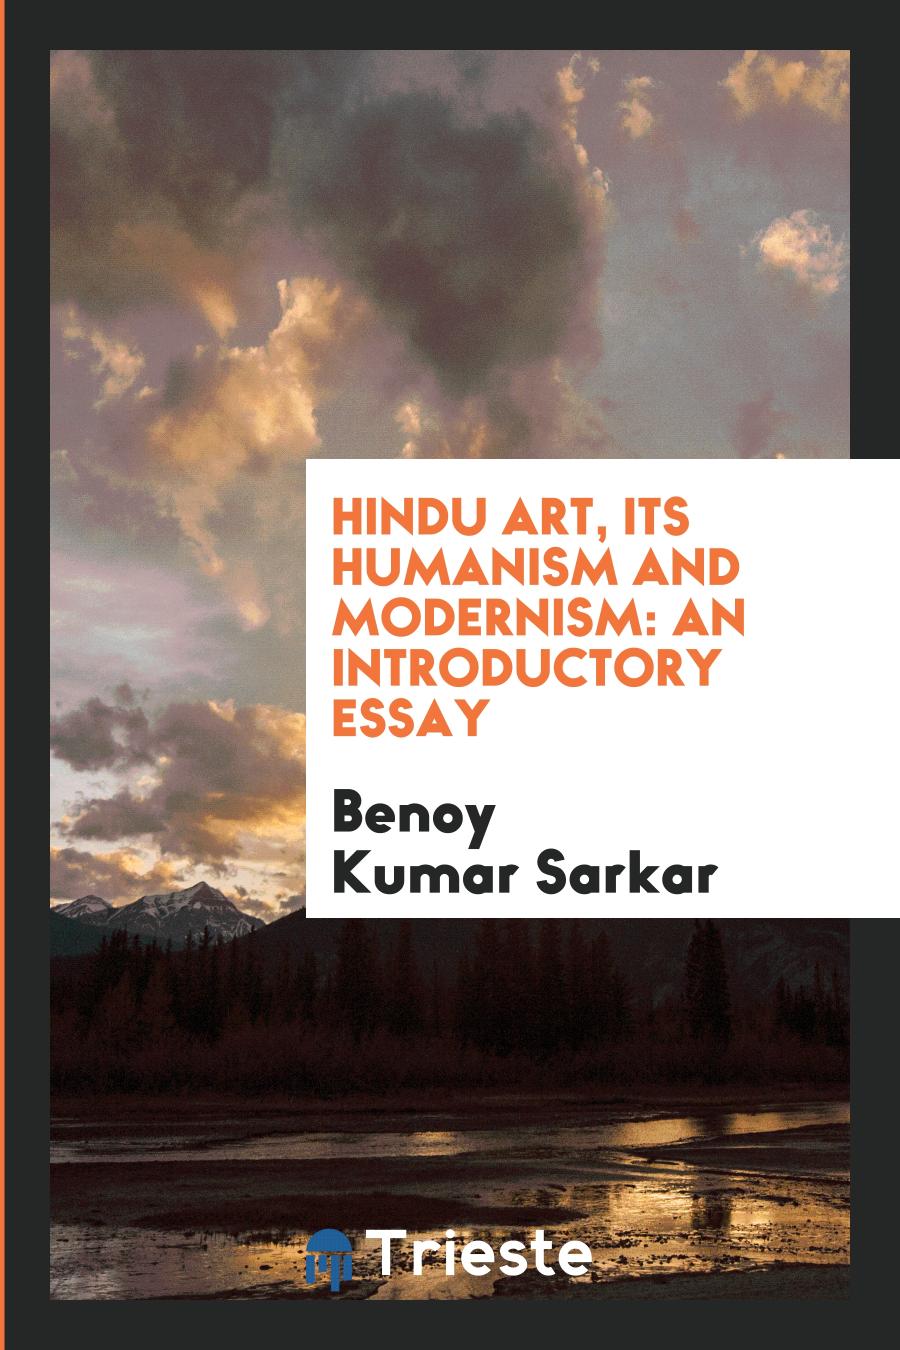 Hindu Art, Its Humanism and Modernism: An Introductory Essay